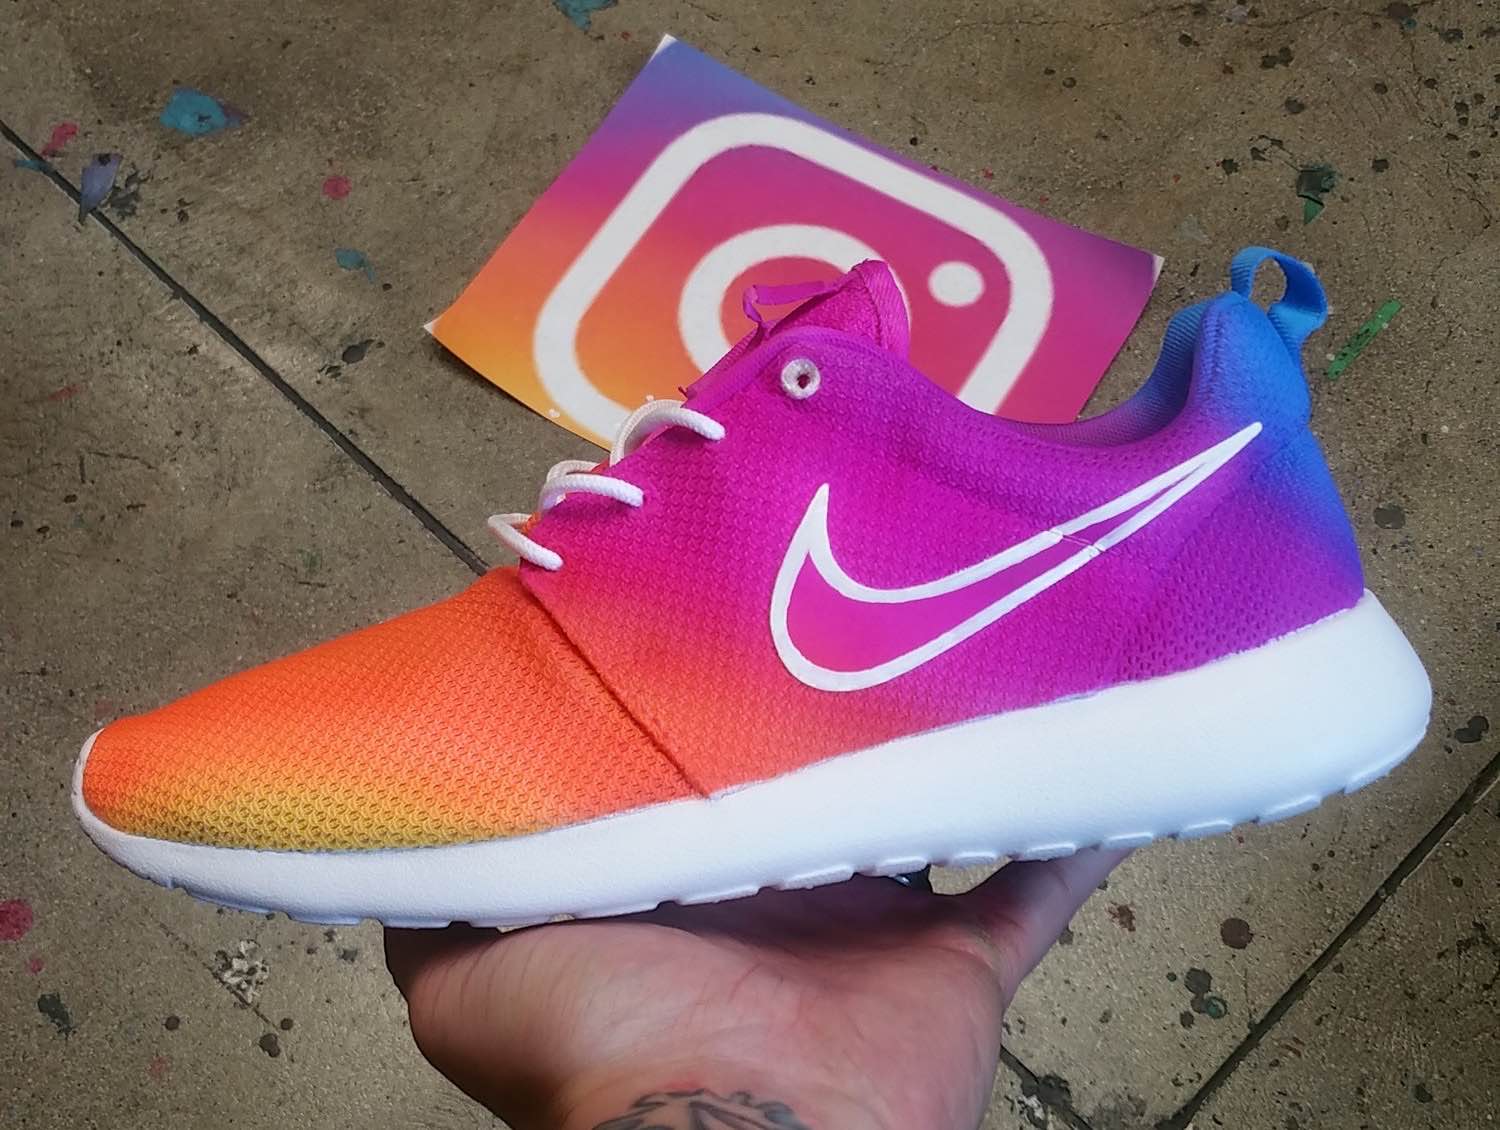 The "Instagram Logo" hand-painted Nike Roshe shoes. ($225 per pair; allow up to 4 weeks for delivery)